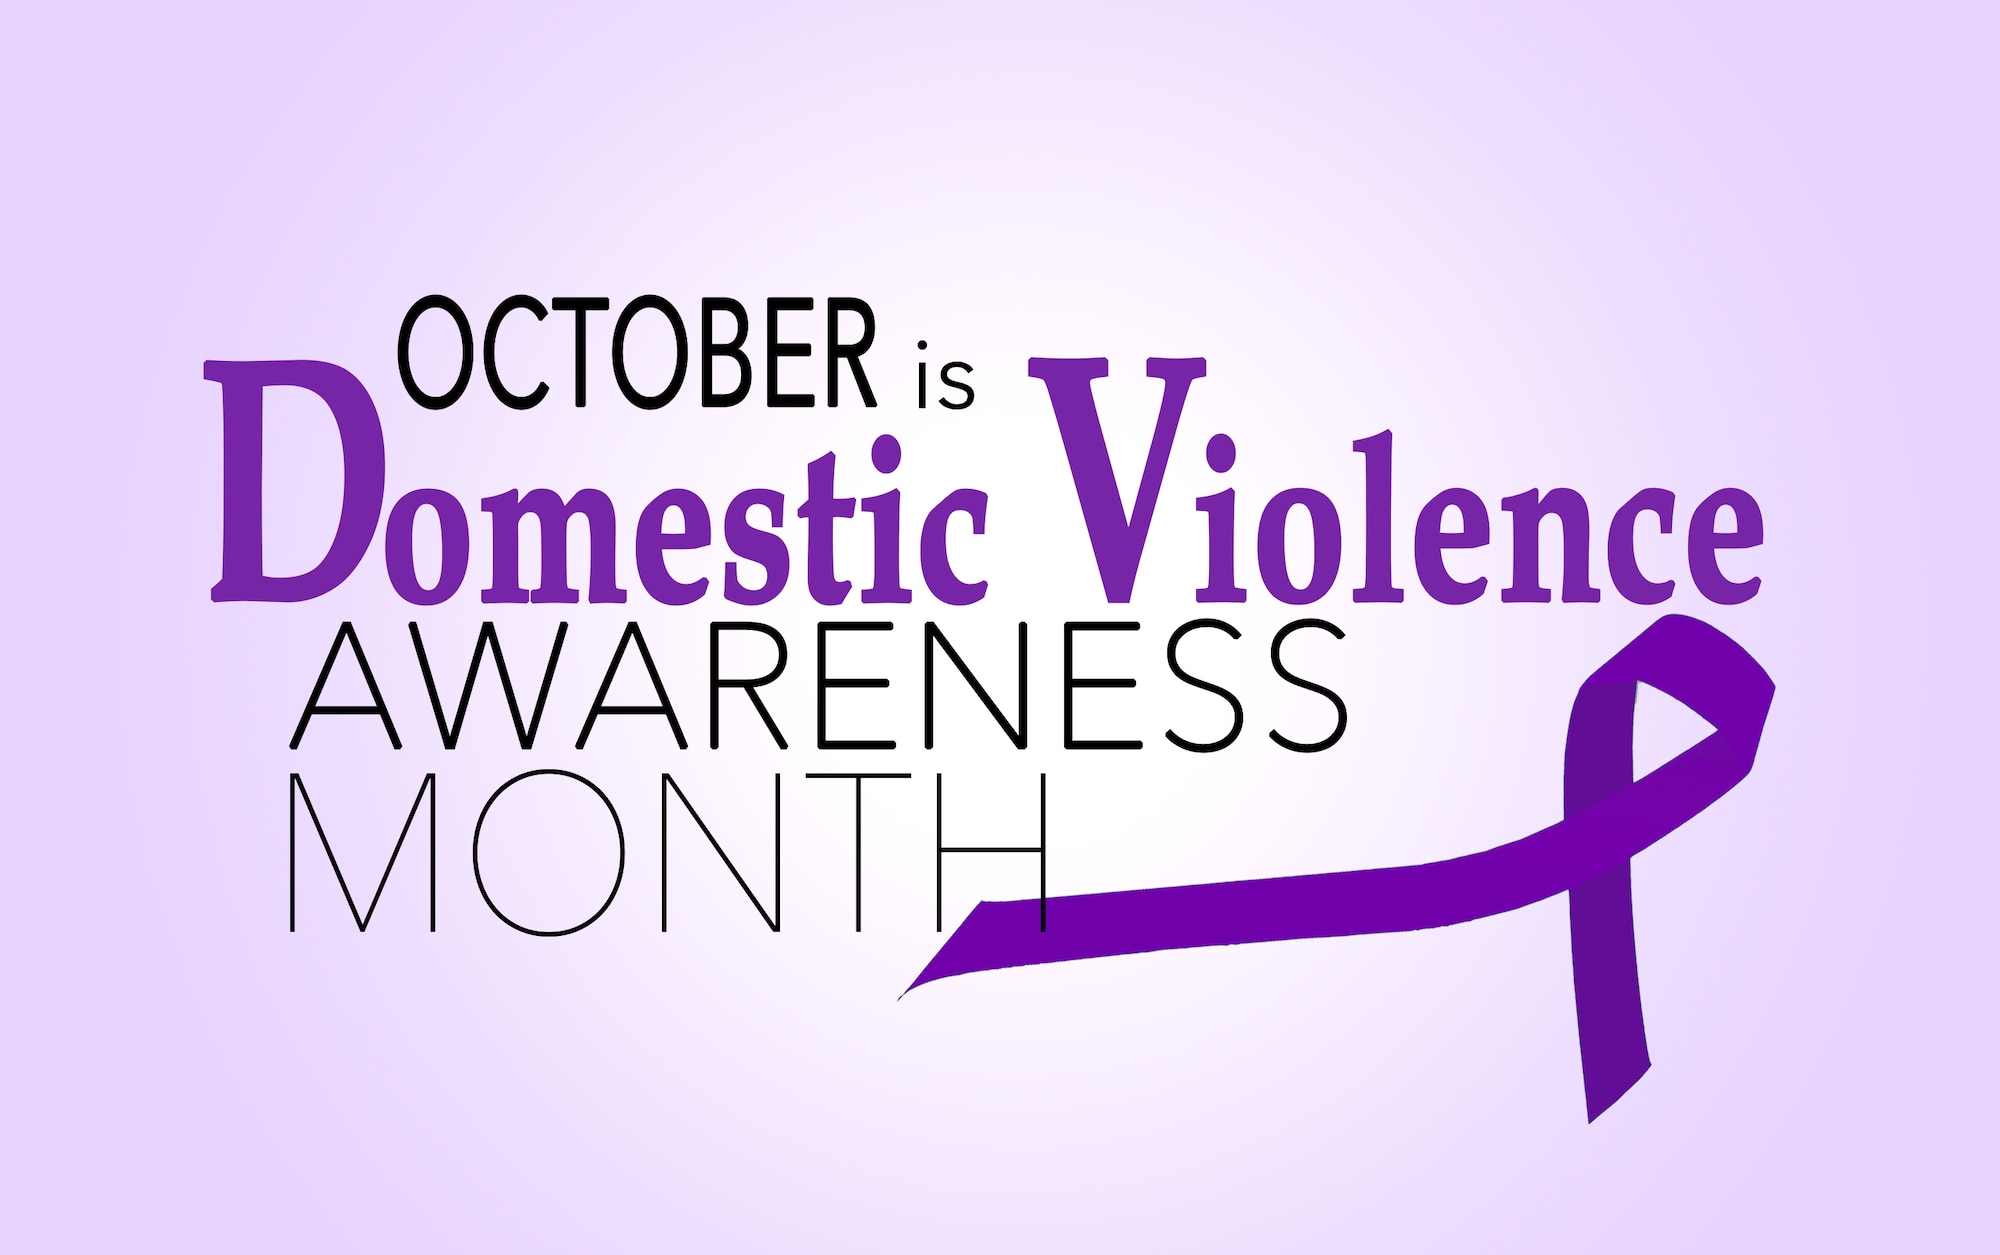 9. How to Create Nail Art Ribbons for Domestic Violence Awareness - wide 6